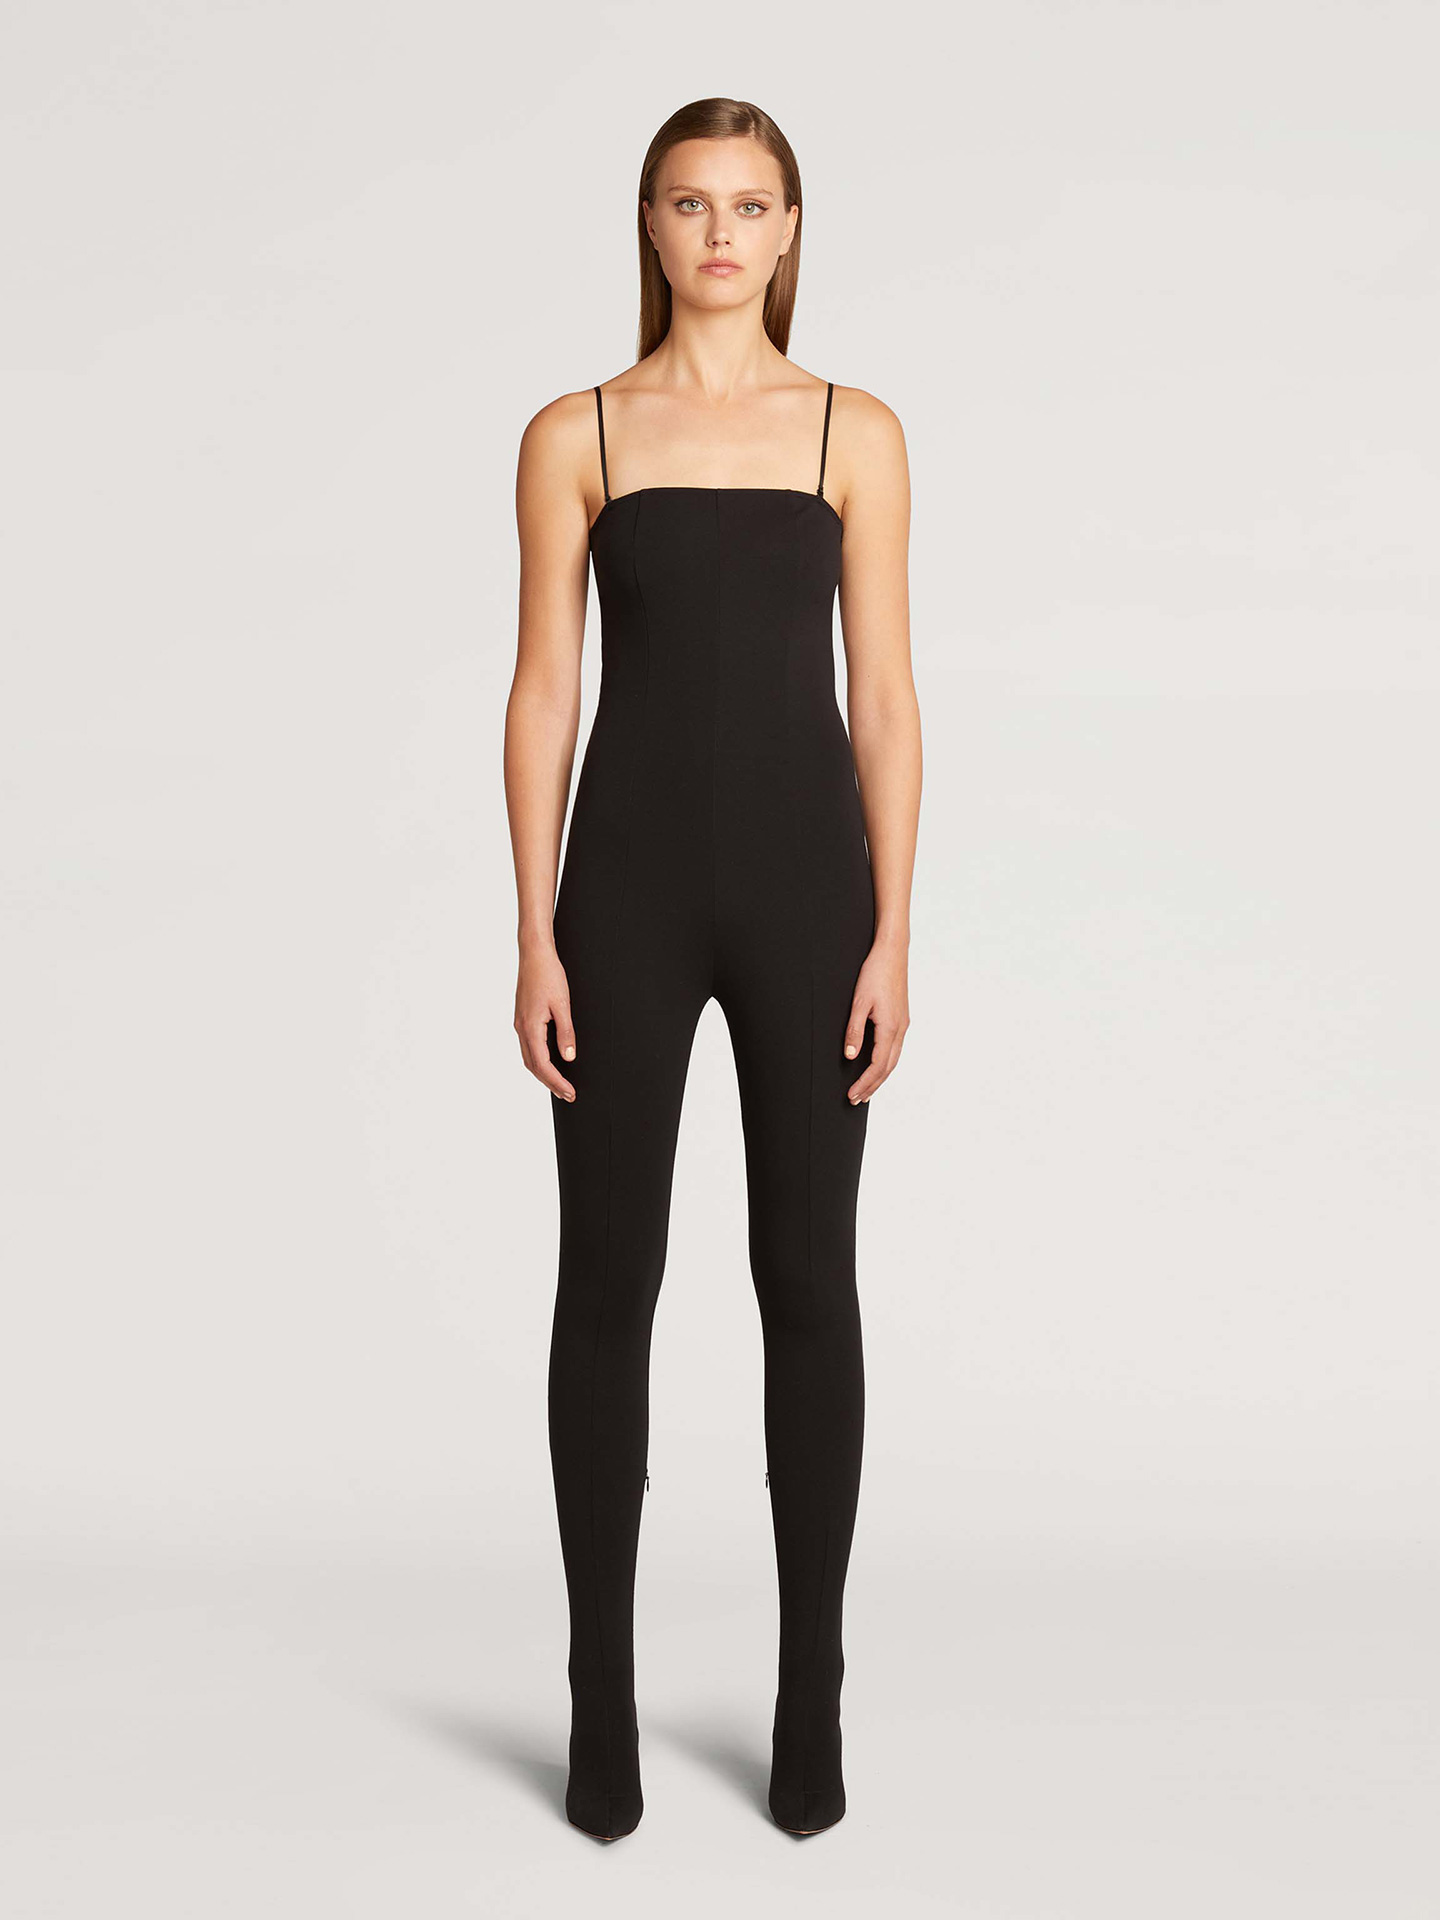 Wolford - Catsuit with shoes, Frau, black, Größe: XS42 von Wolford